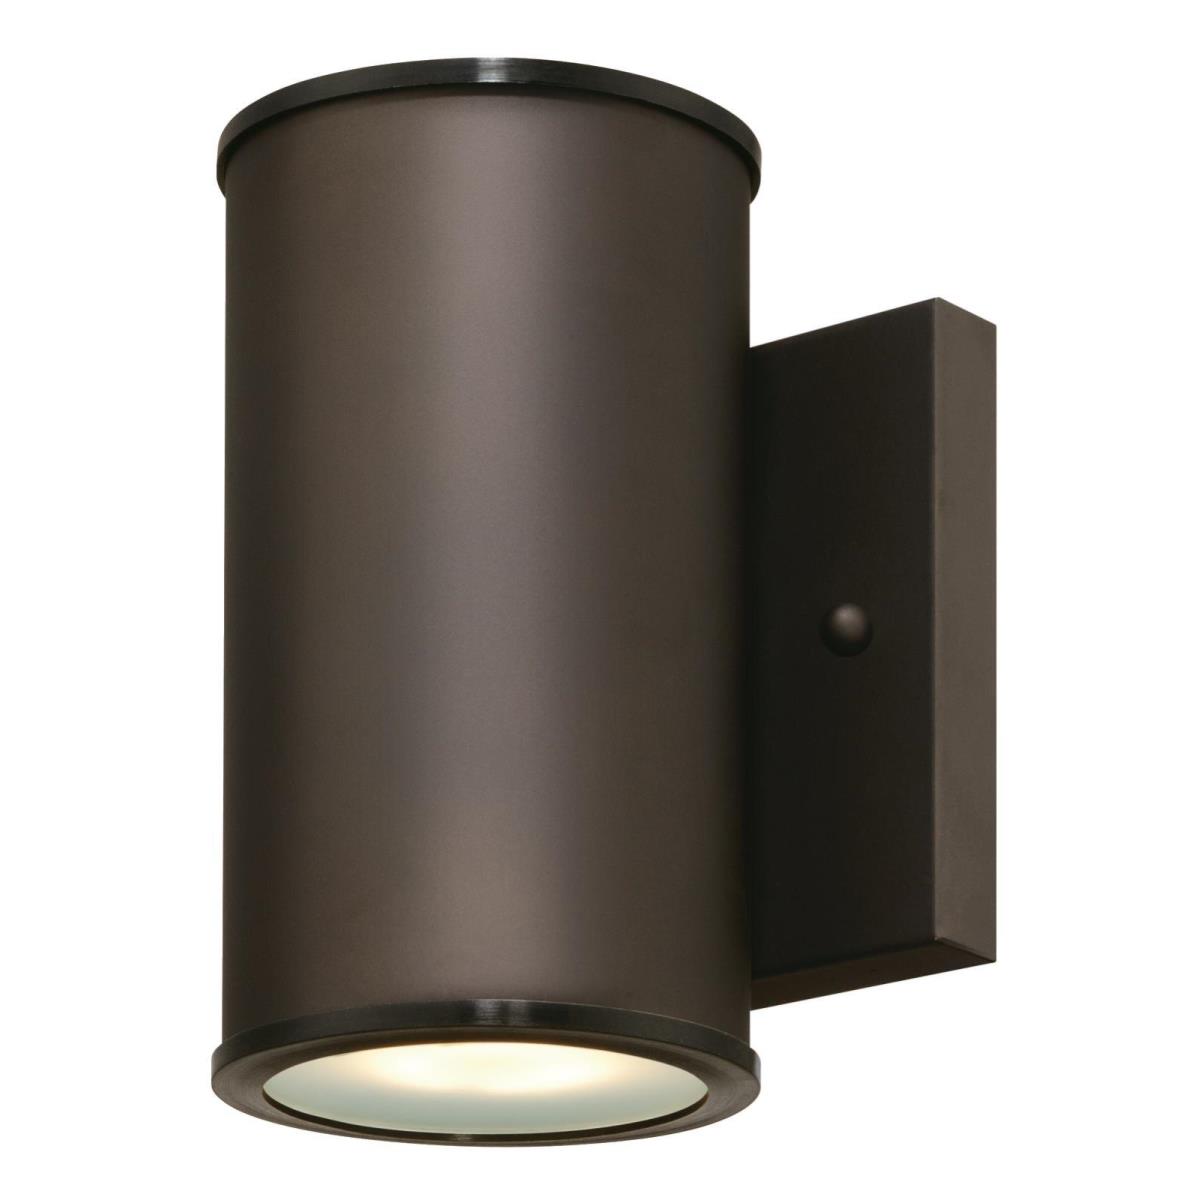 1 Light LED Wall Fixture Oil Rubbed Bronze Finish with Frosted Glass Lens